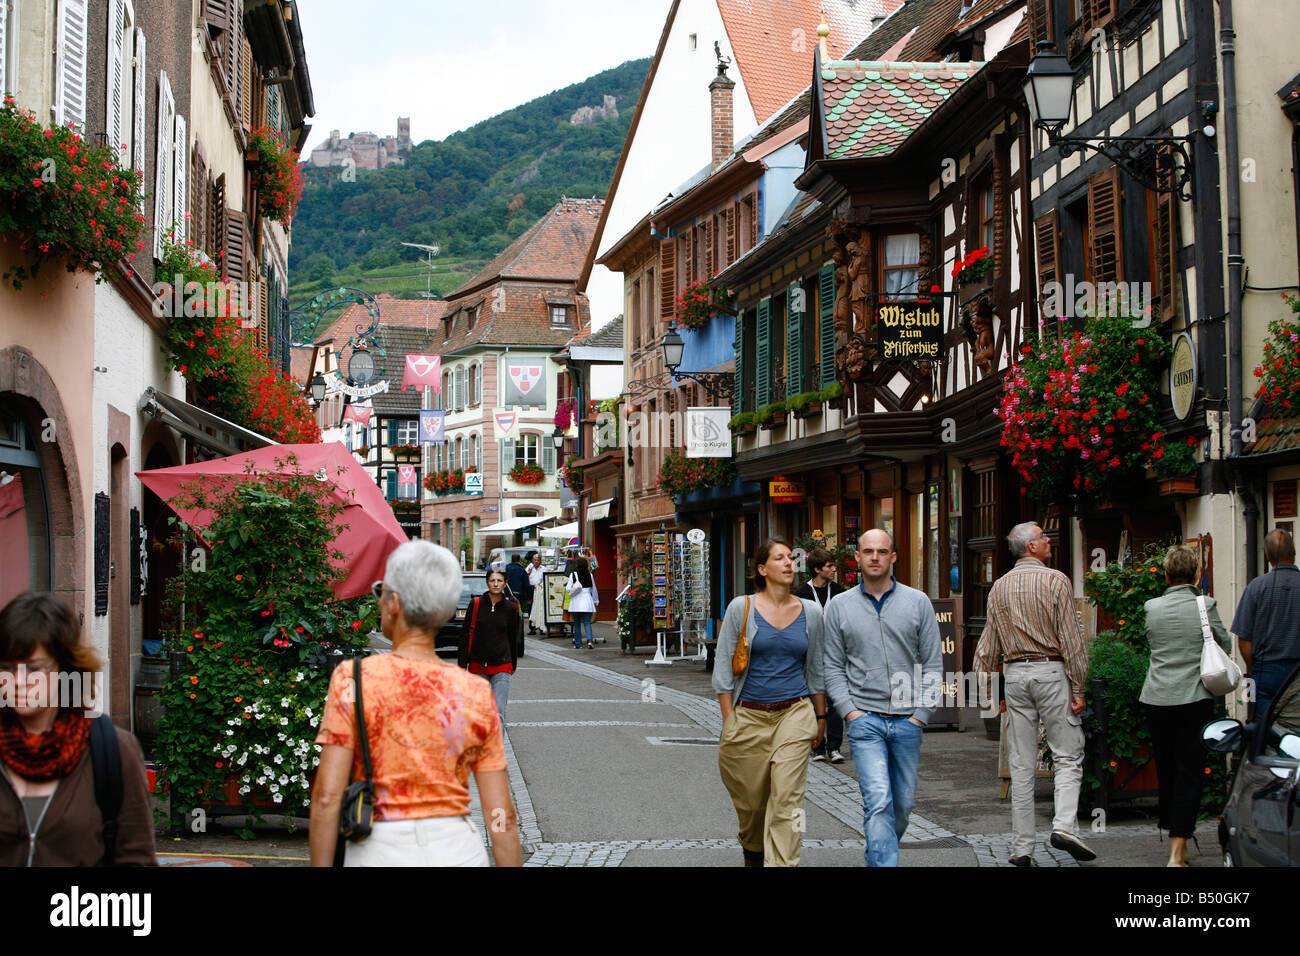 Sep 2008 Street scene in Ribeauville village Alsace France Stock Photo